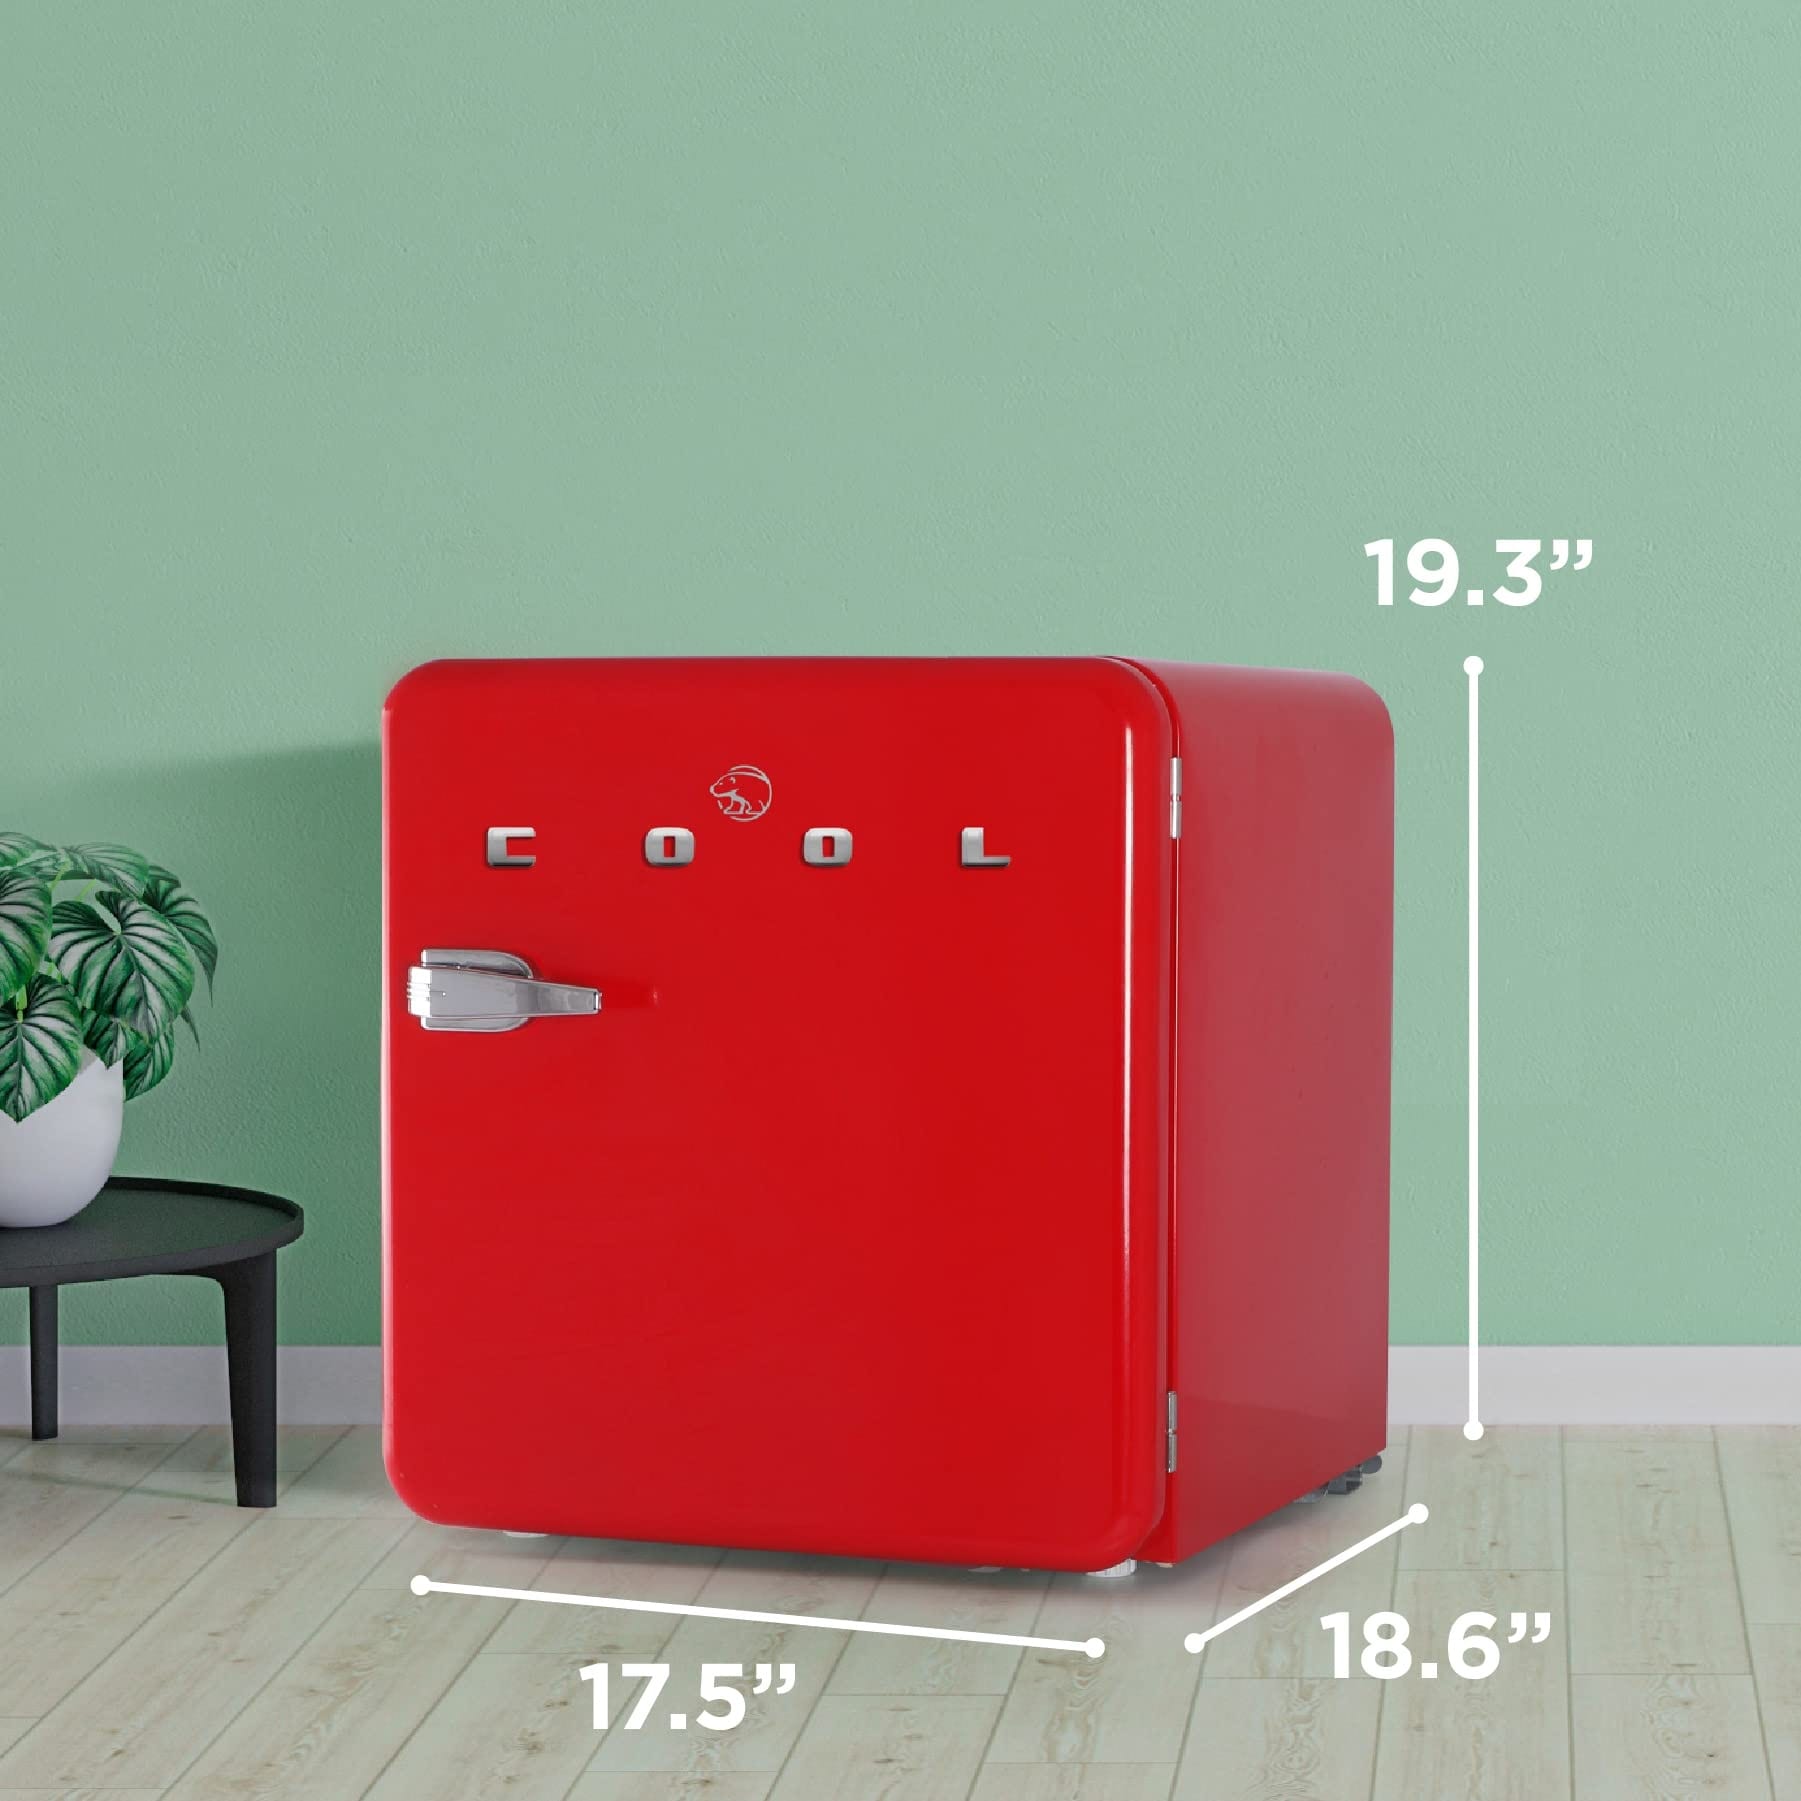 Commercial Cool 1.6 Cu. Ft. Retro Refrigerator,Red